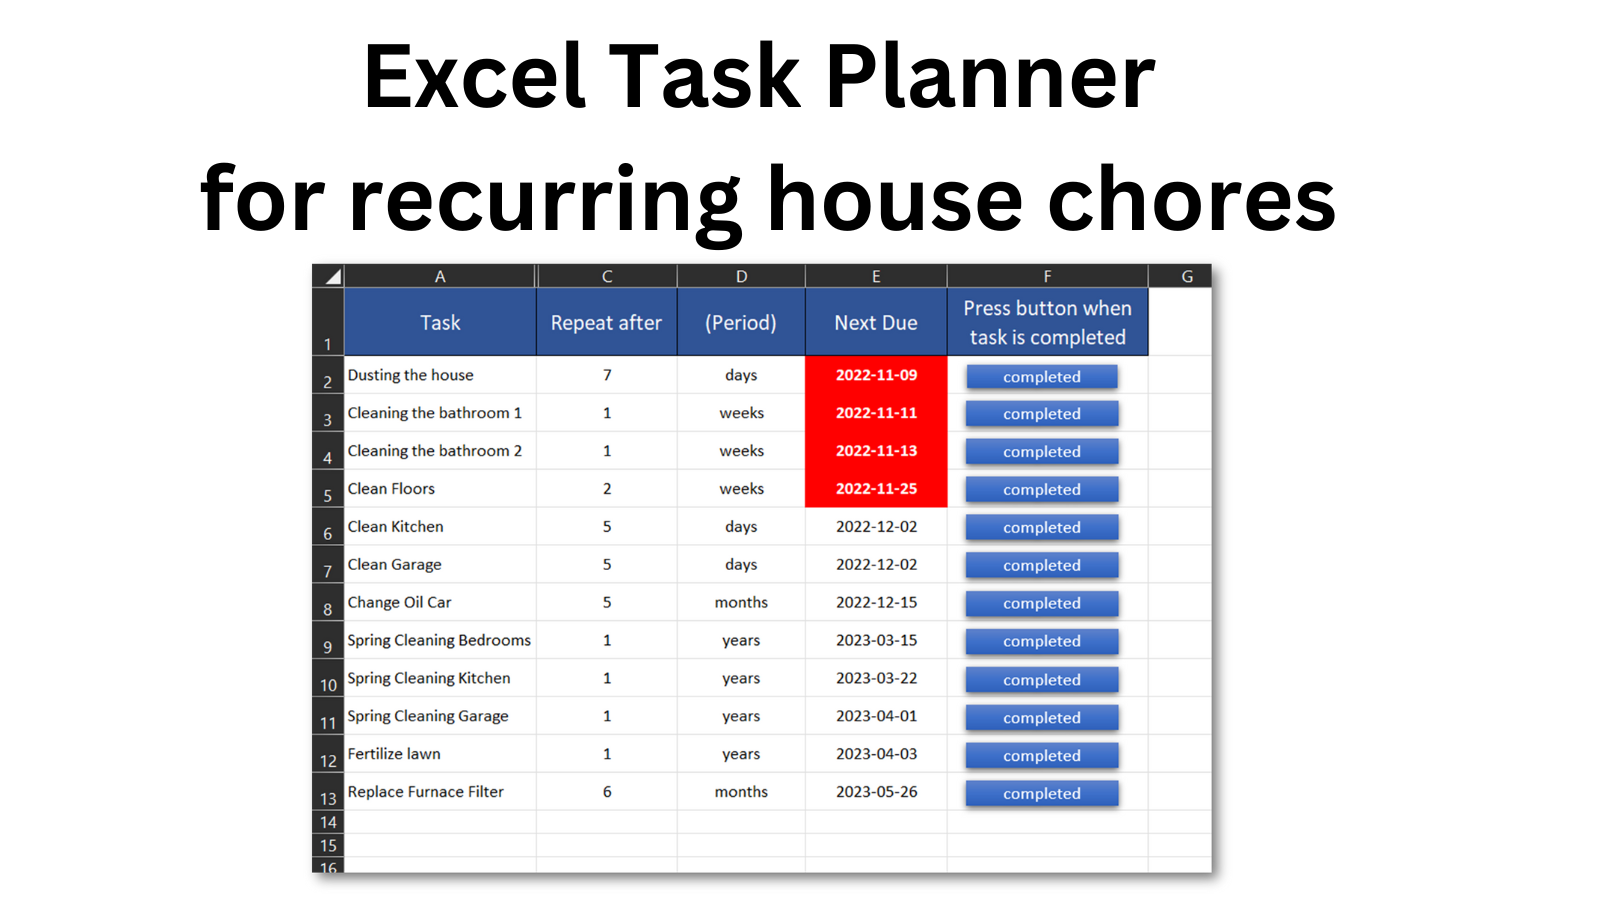 Excel Task Planner for house chores